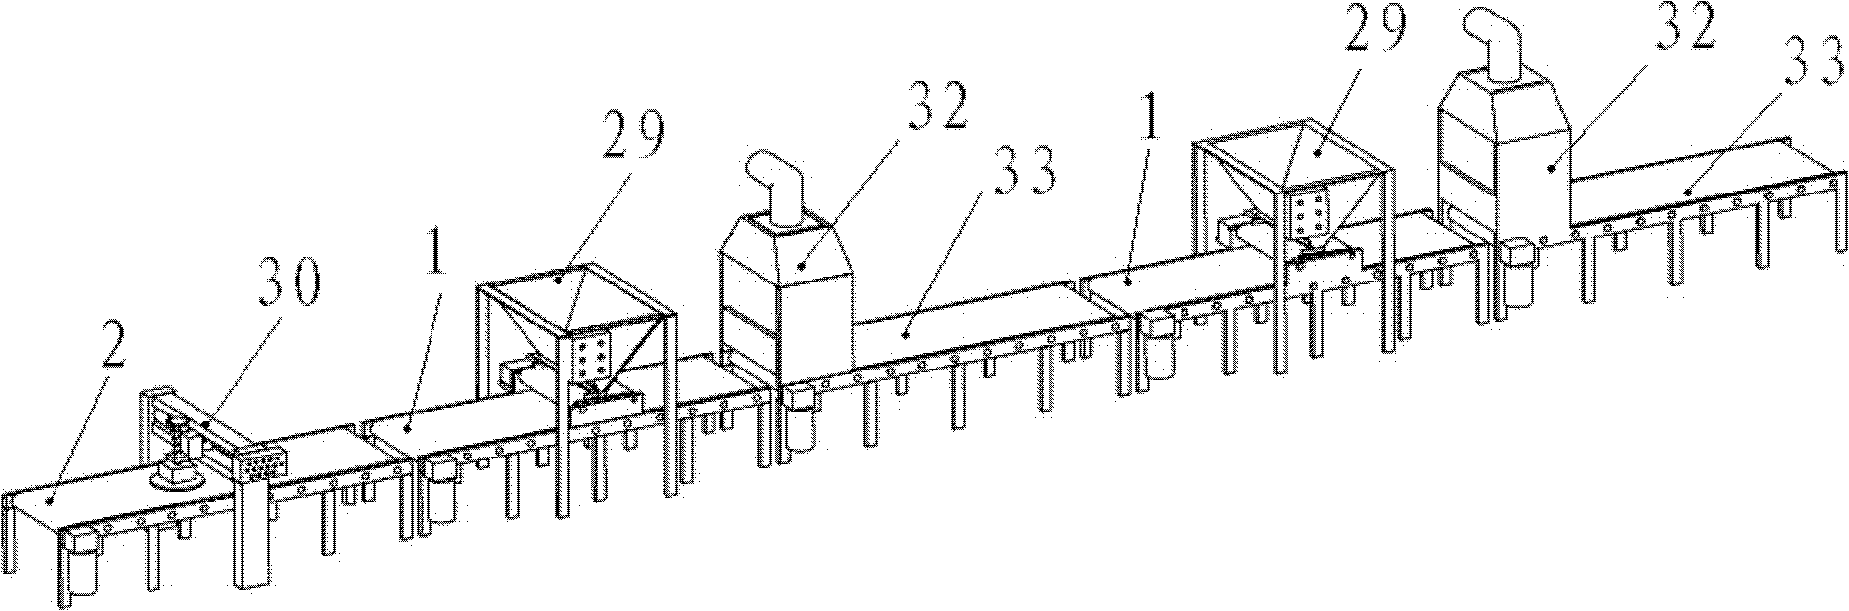 System and method for producing colored sand plate